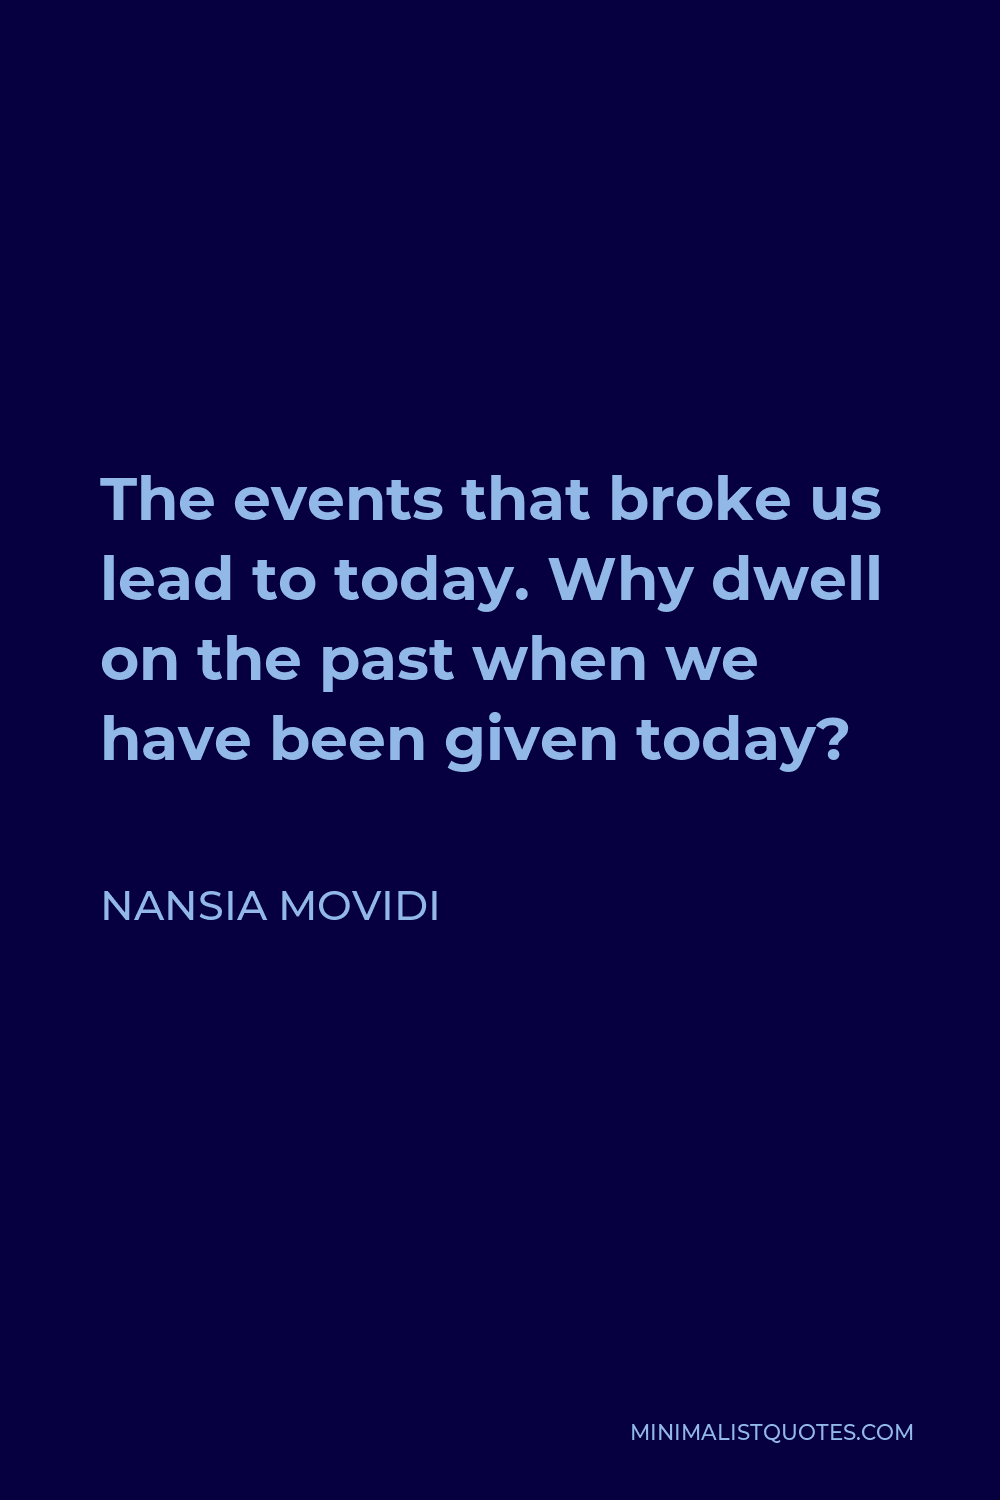 Nansia Movidi Quote - The events that broke us lead to today. Why dwell on the past when we have been given today?